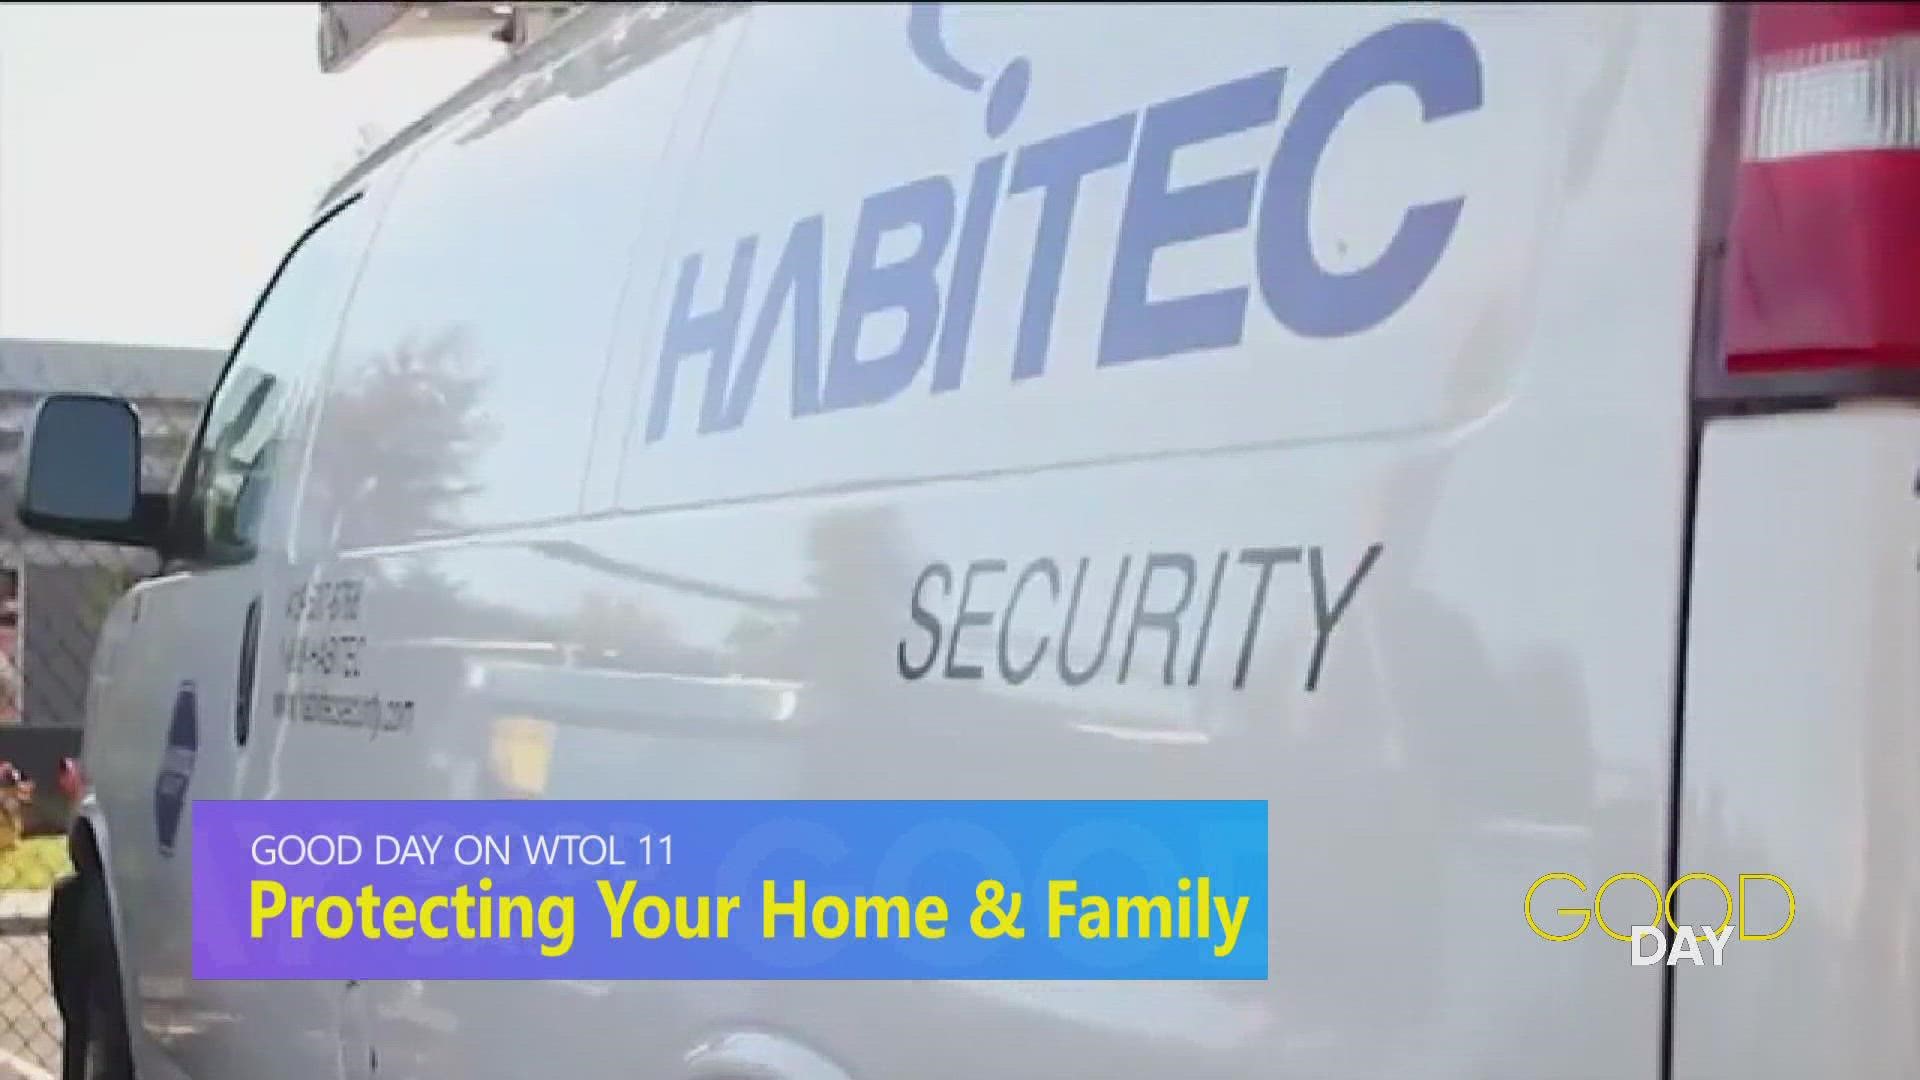 John Smyth from Habitec Security discusses how the company has evolved over its 50 years in business; plus, what you can do to secure your home.